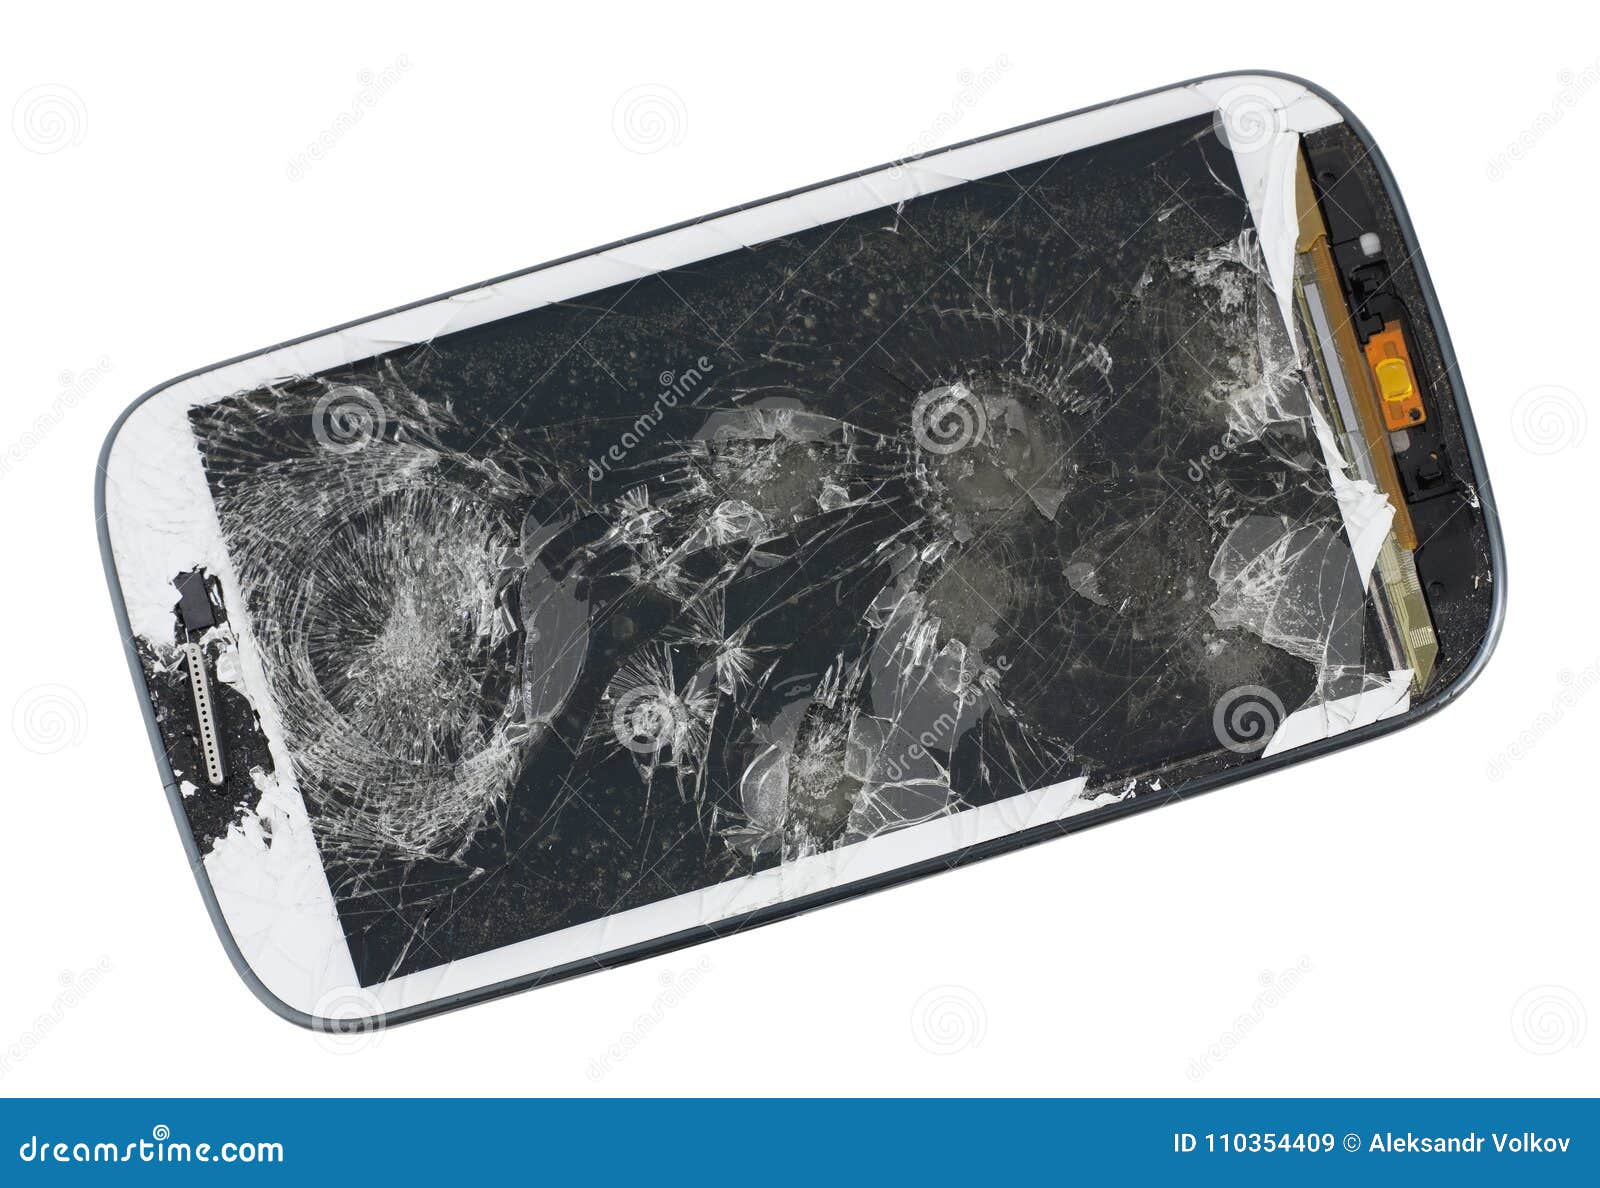 a broken screen of modern phone. this device was wiped from a p